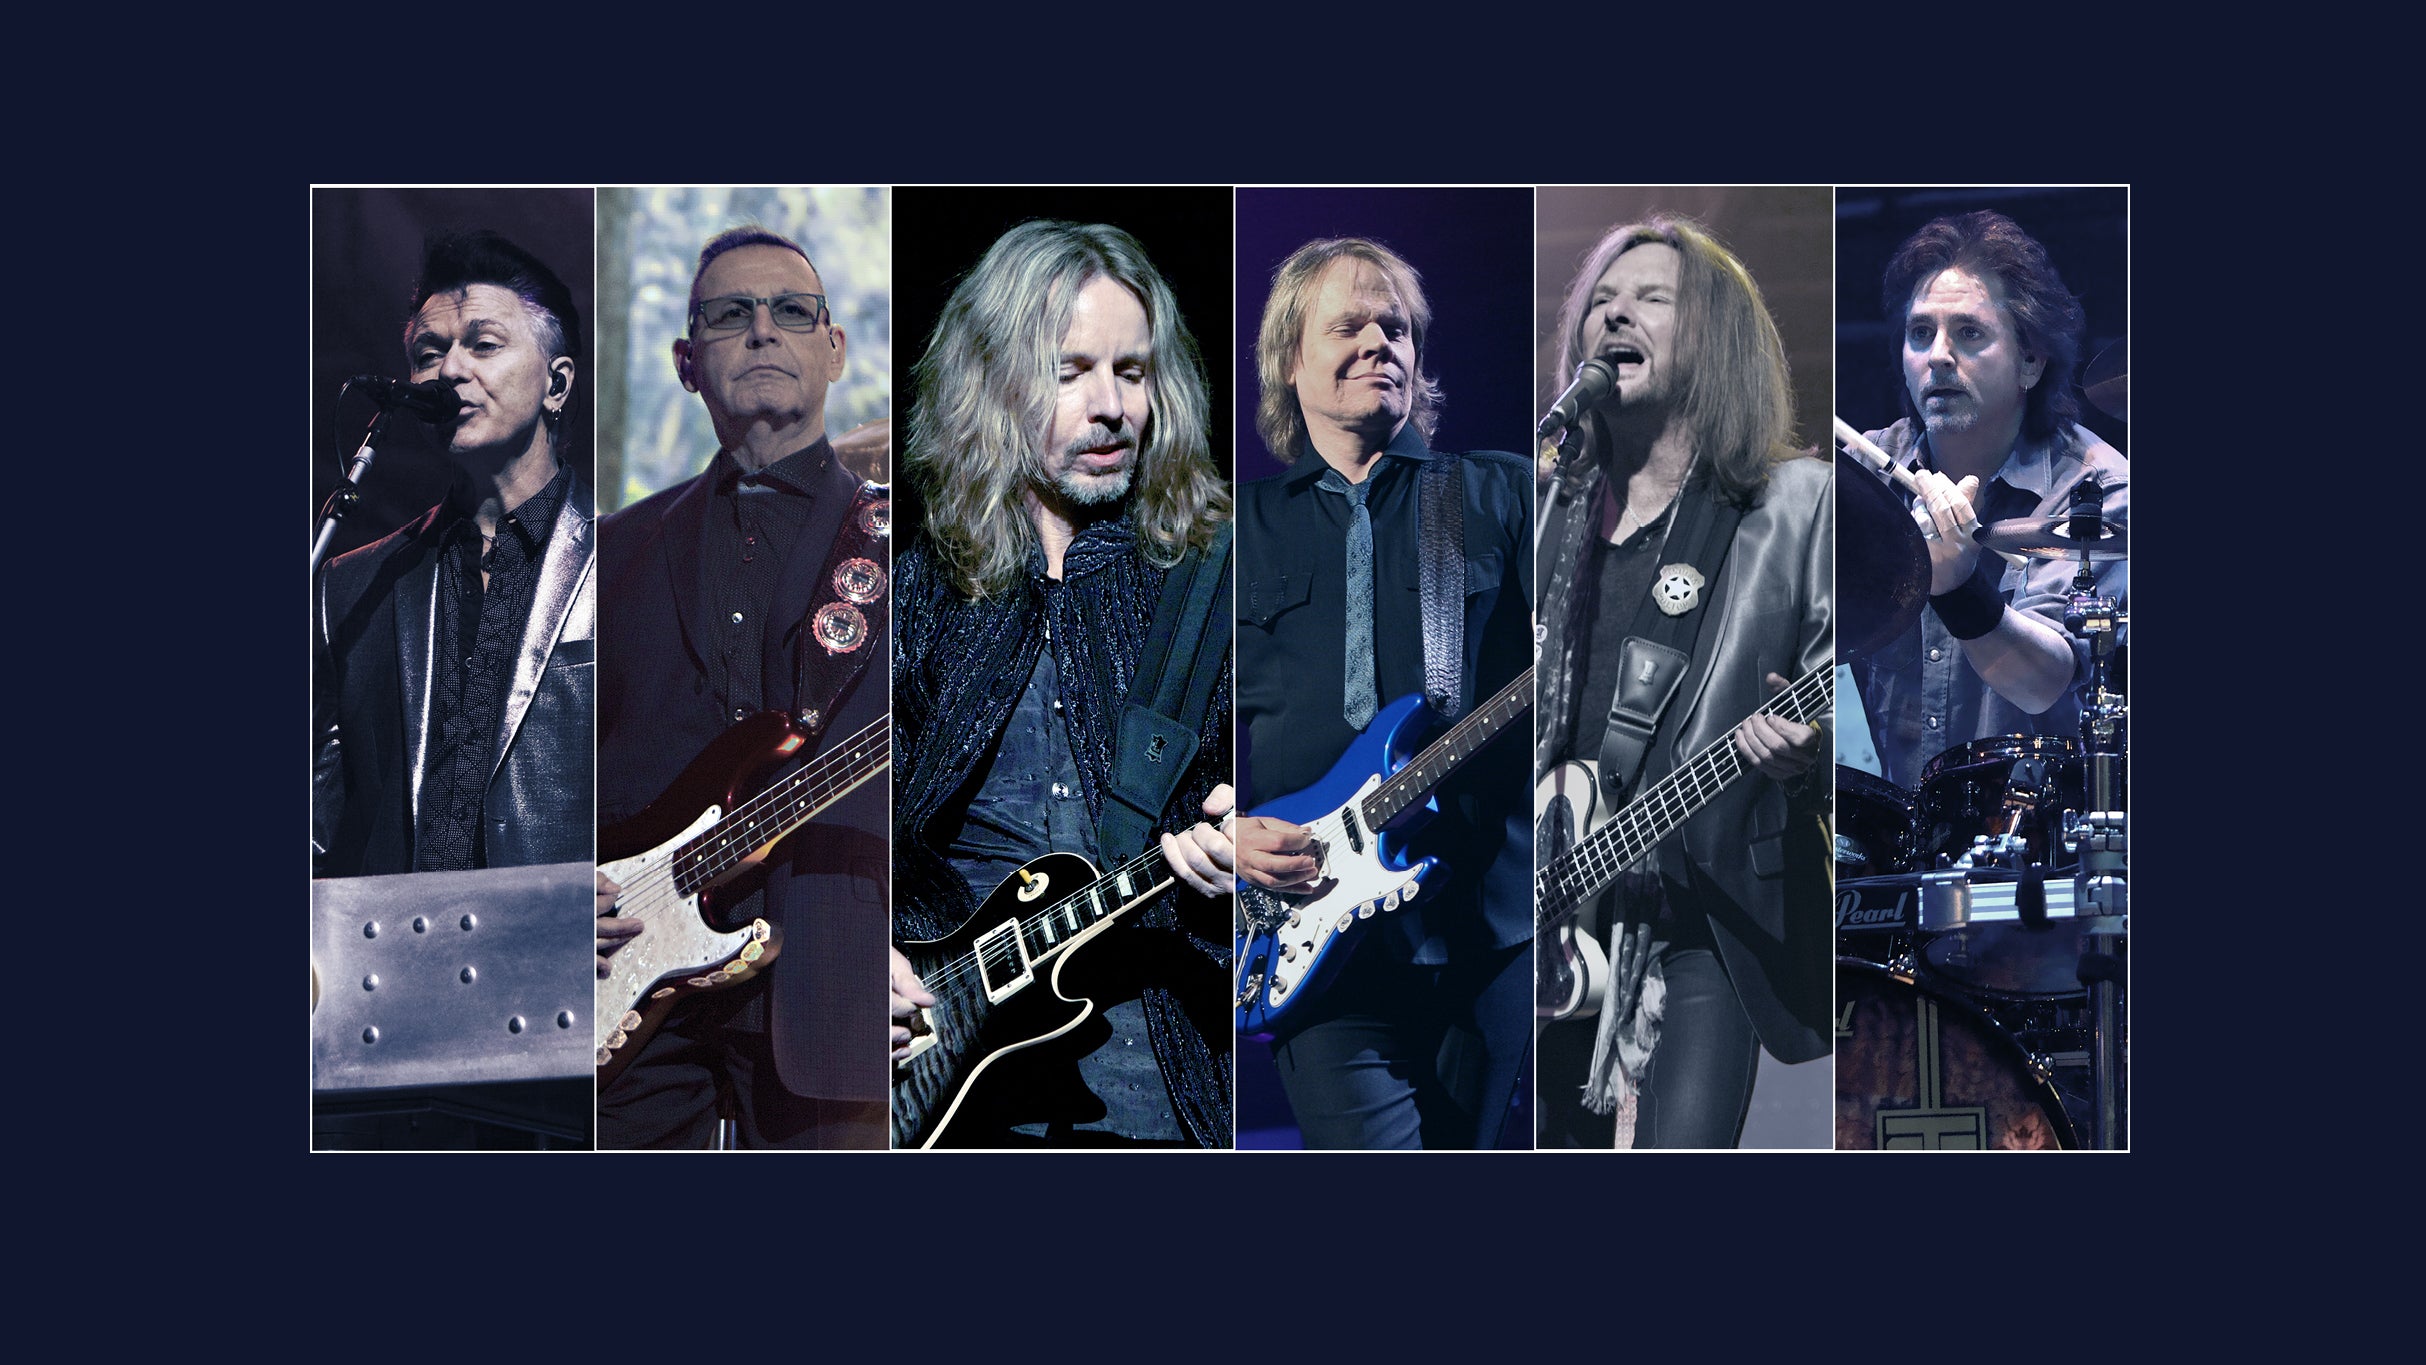 An Evening With: Styx in Wheatland promo photo for Official Platinum presale offer code